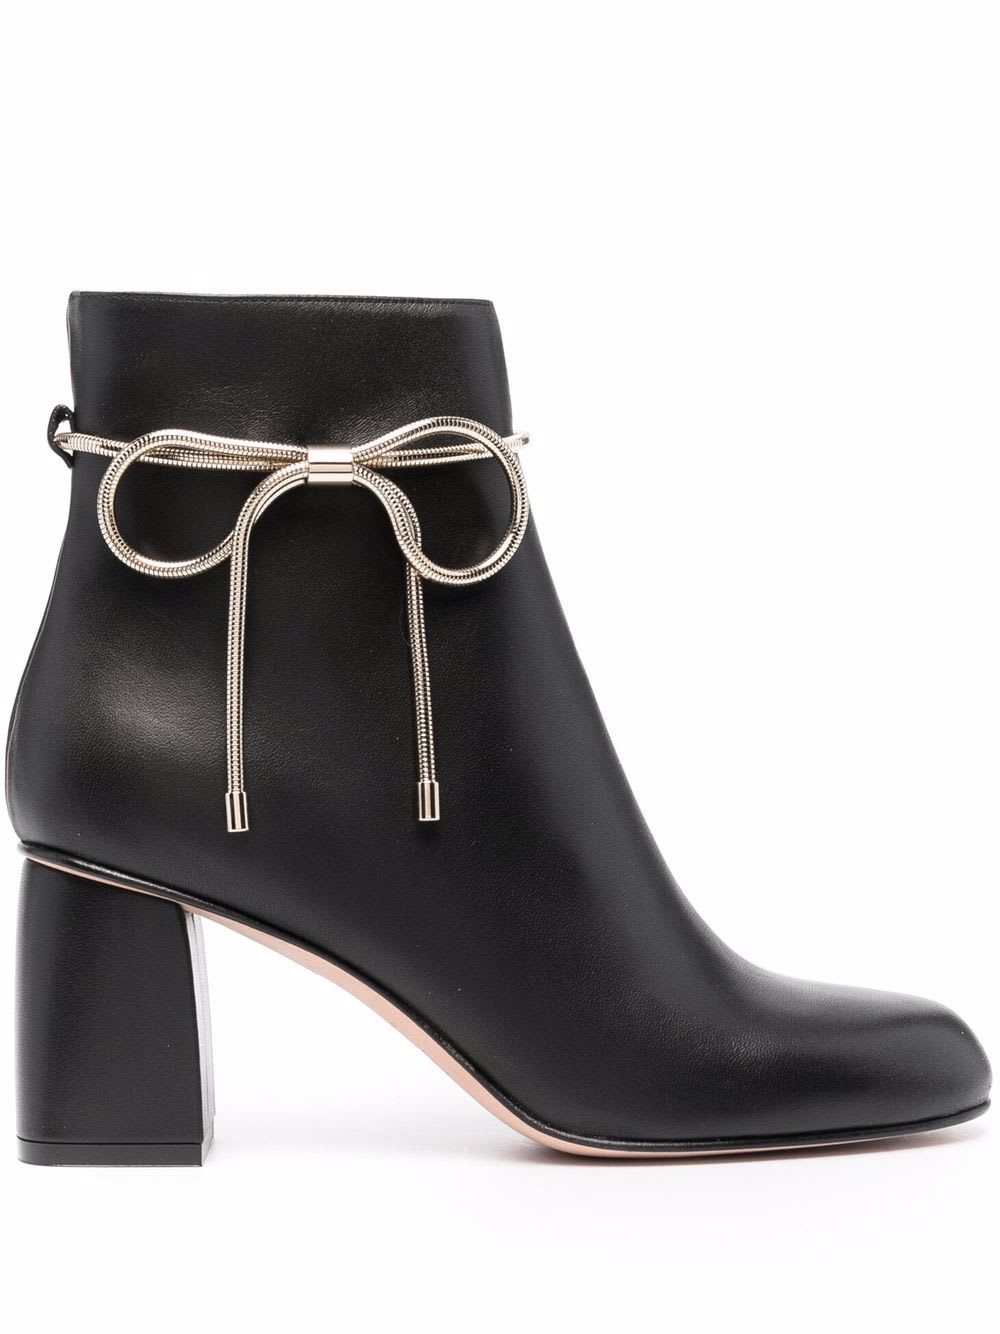 RED Valentino Black Ankle Boot With Bow